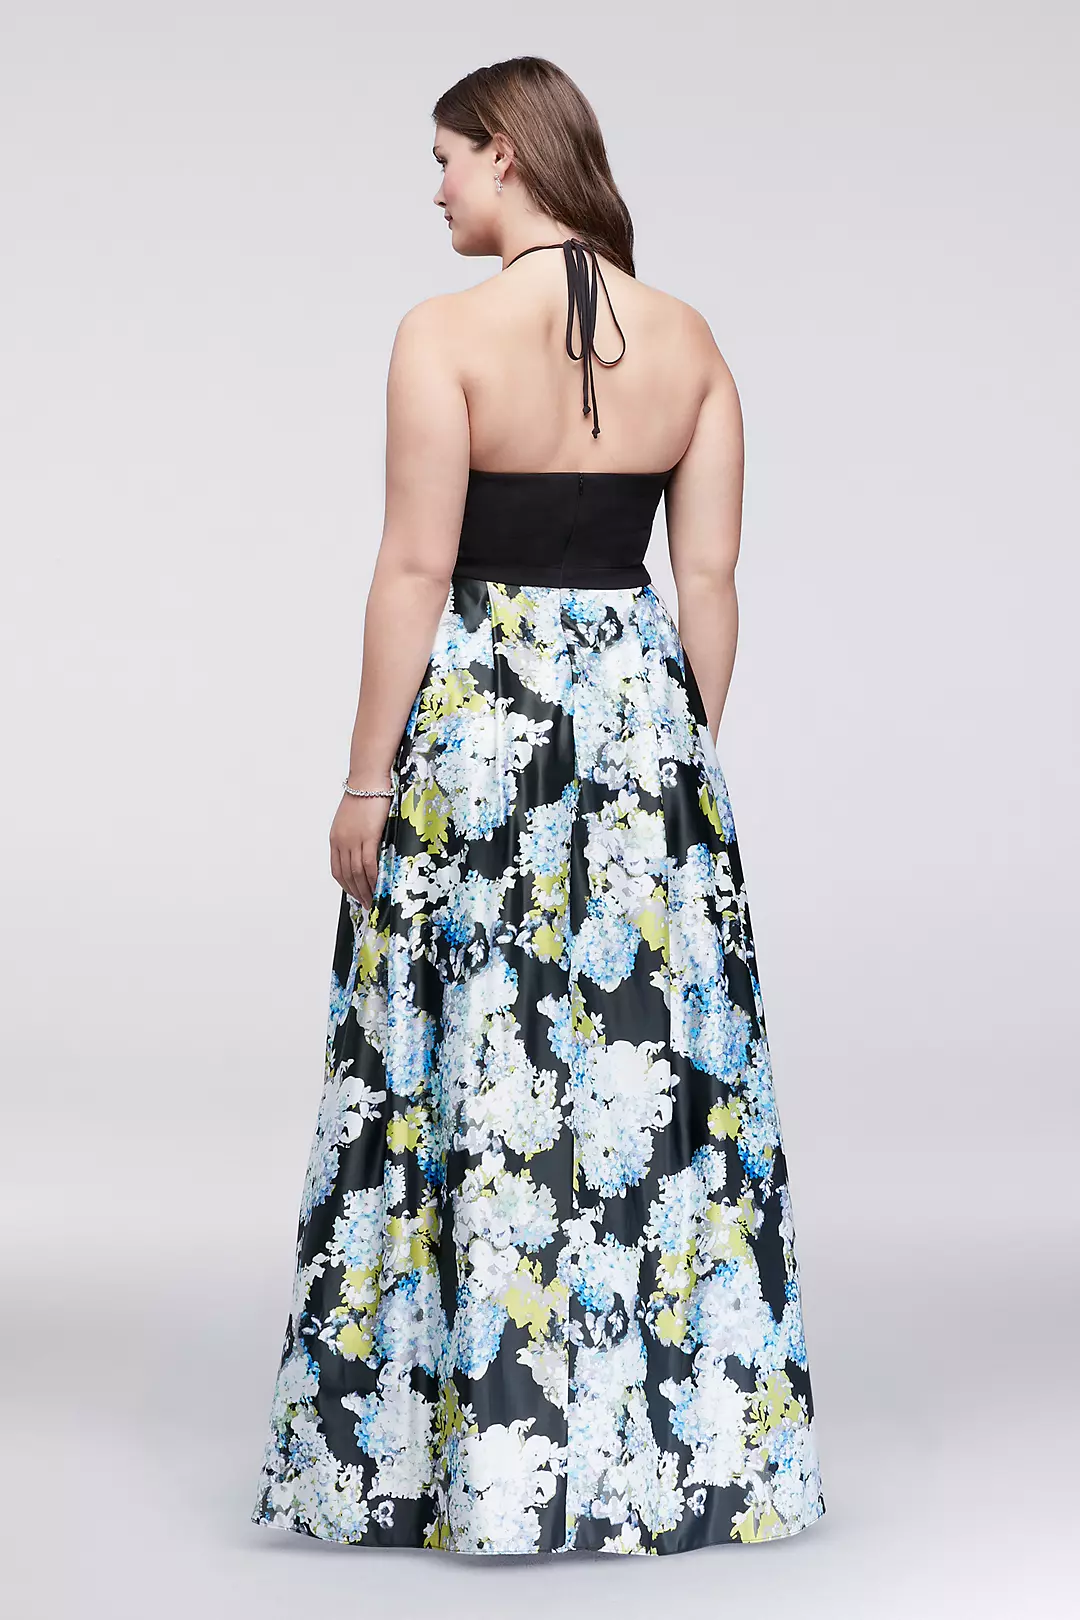 Jersey and Printed Charmeuse Halter Ball Gown Image 2